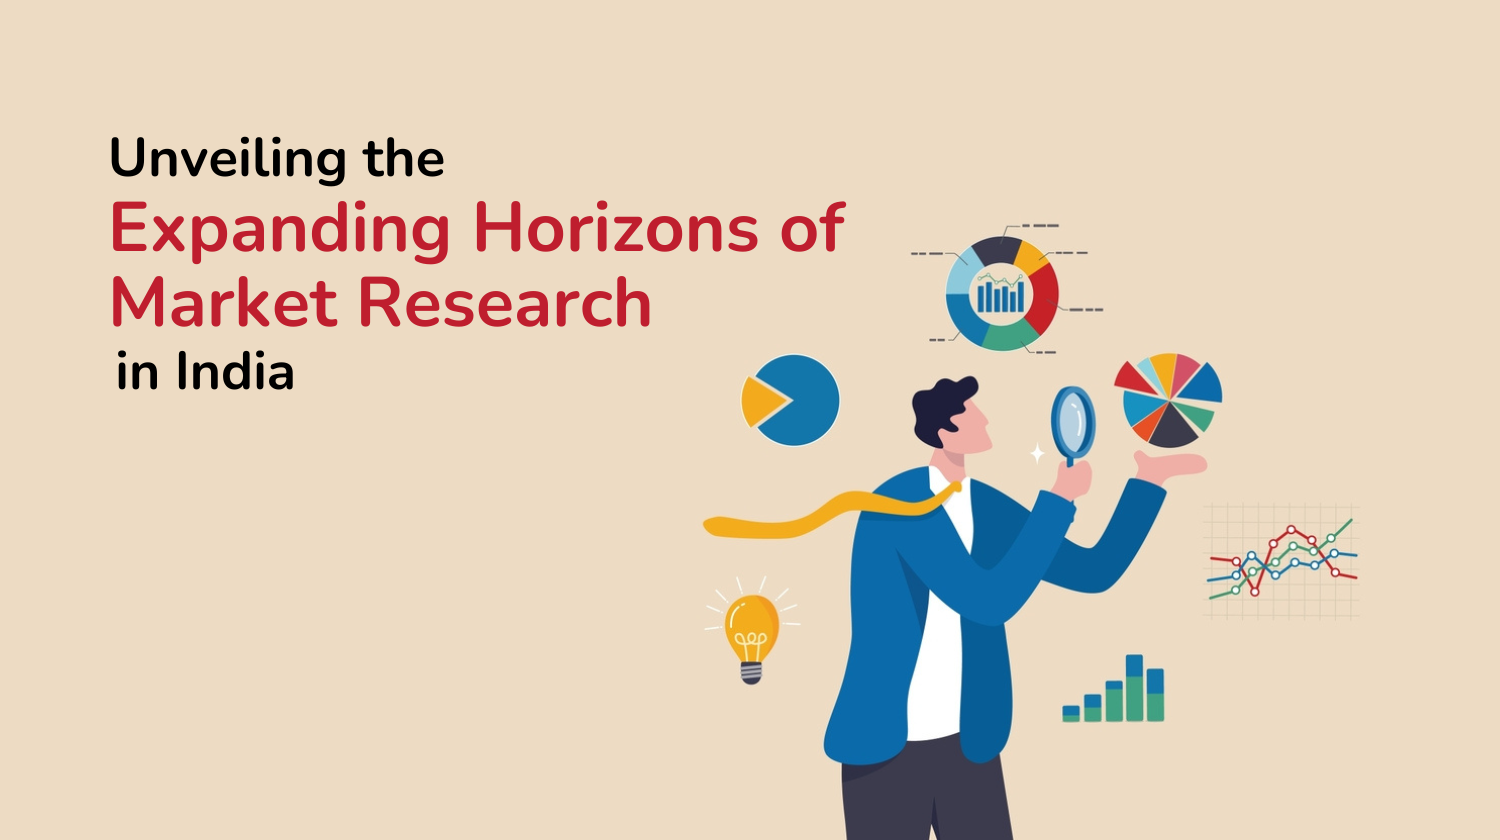 Growth of the market research industry in India